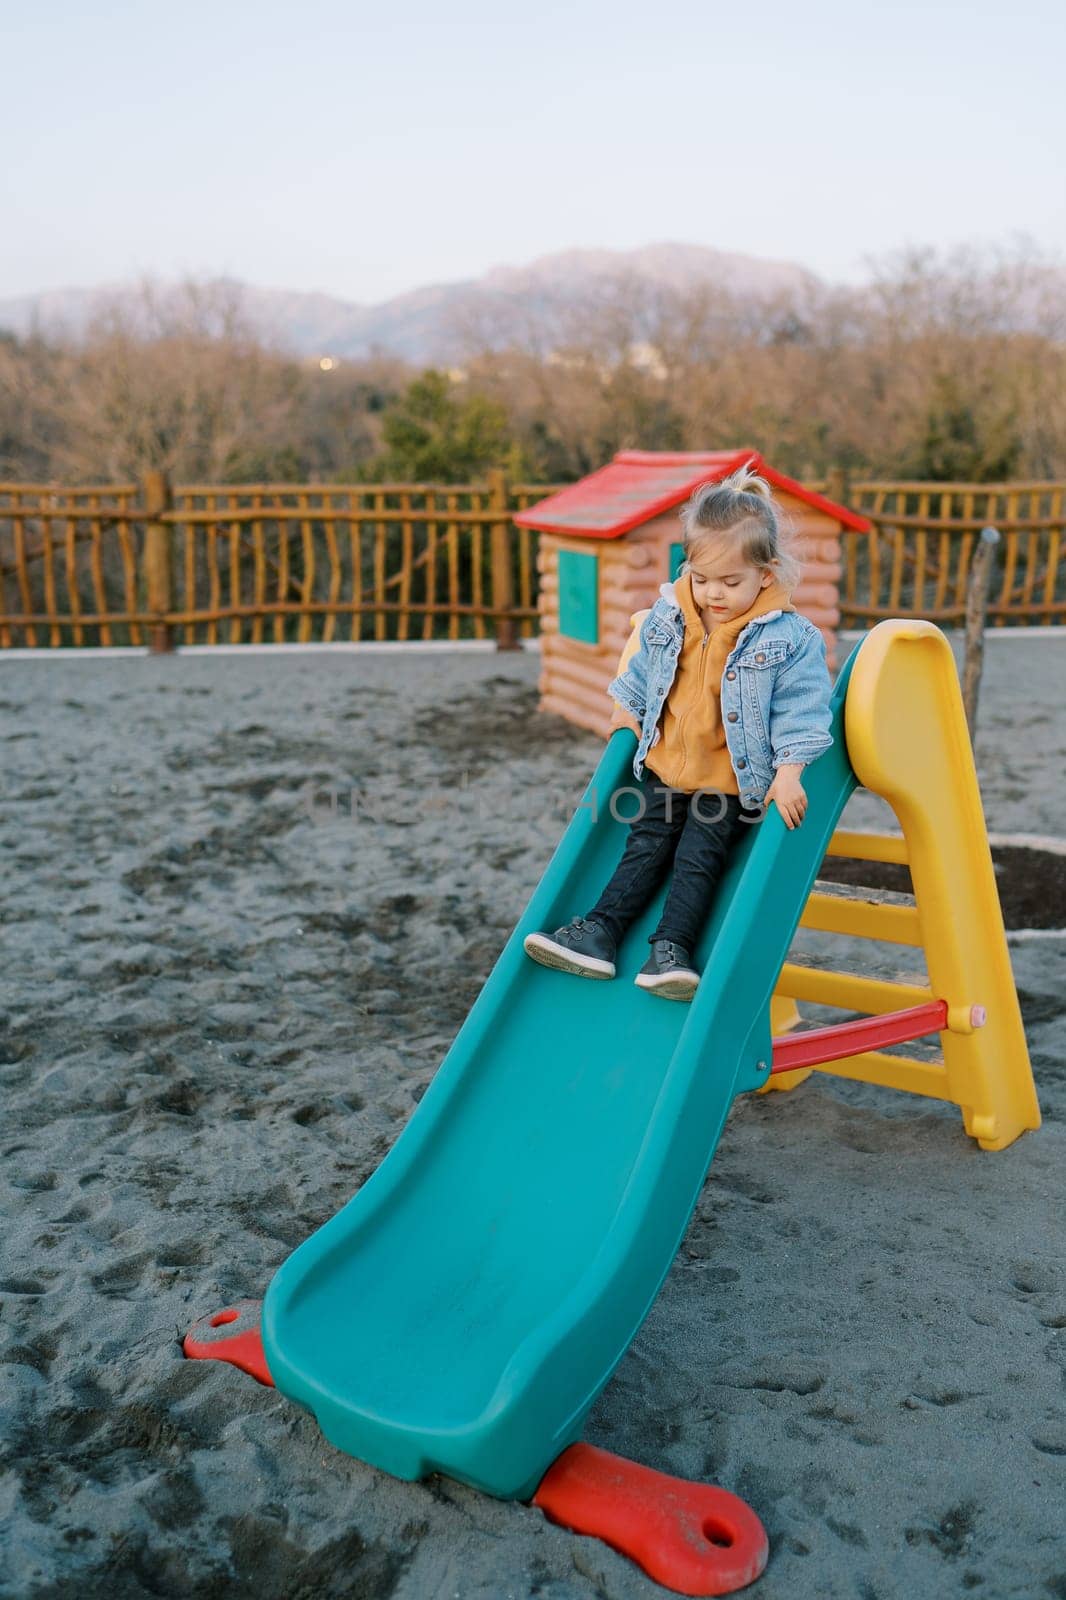 Little girl slides down the slide at the playground. High quality photo